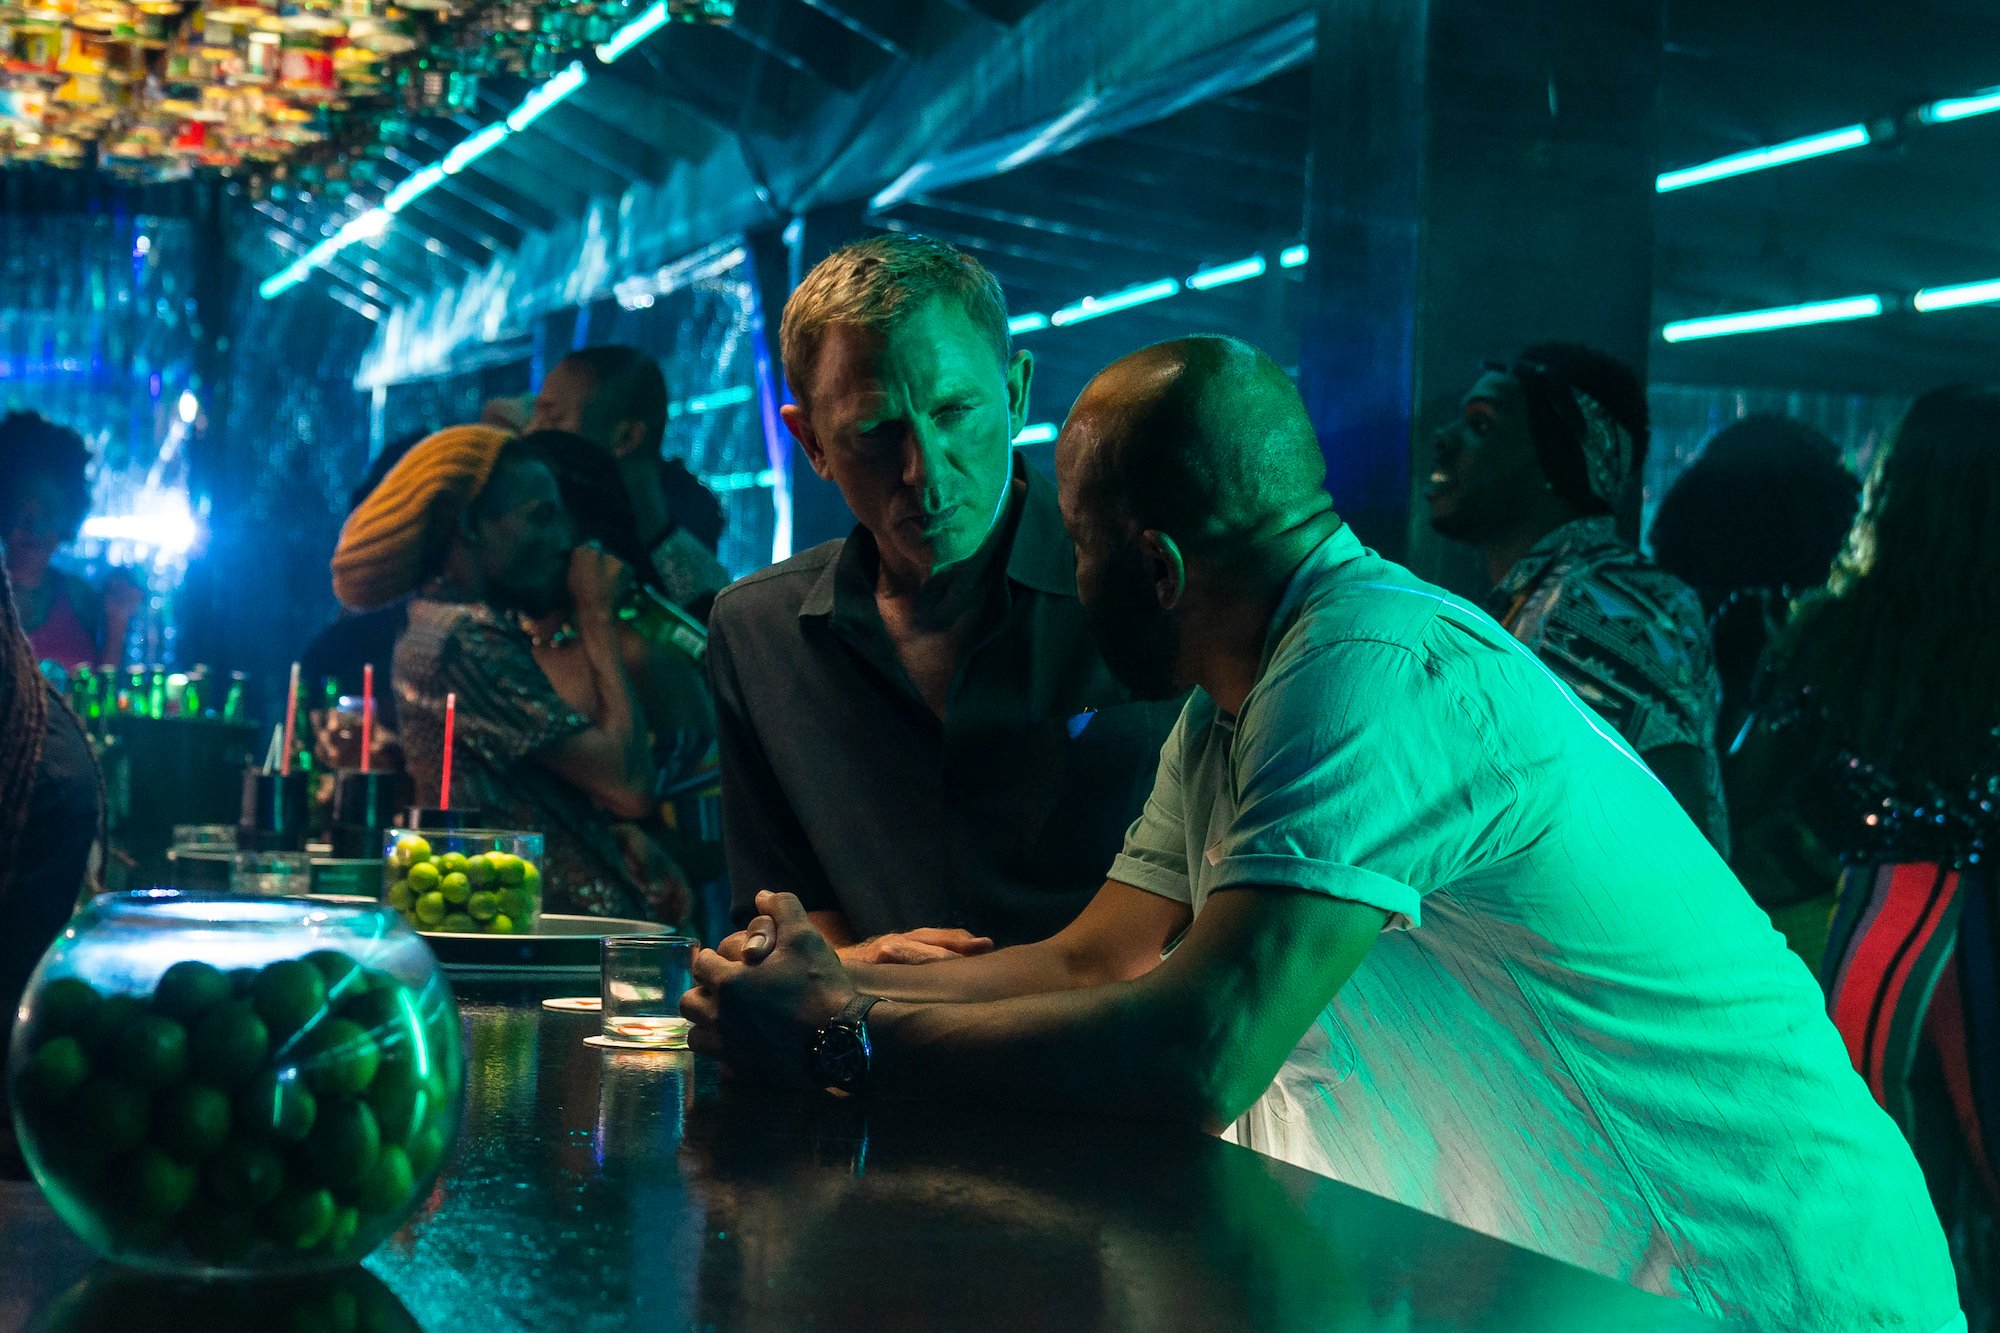 No Time to Die: James Bond talks to Felix Leiter at a bar